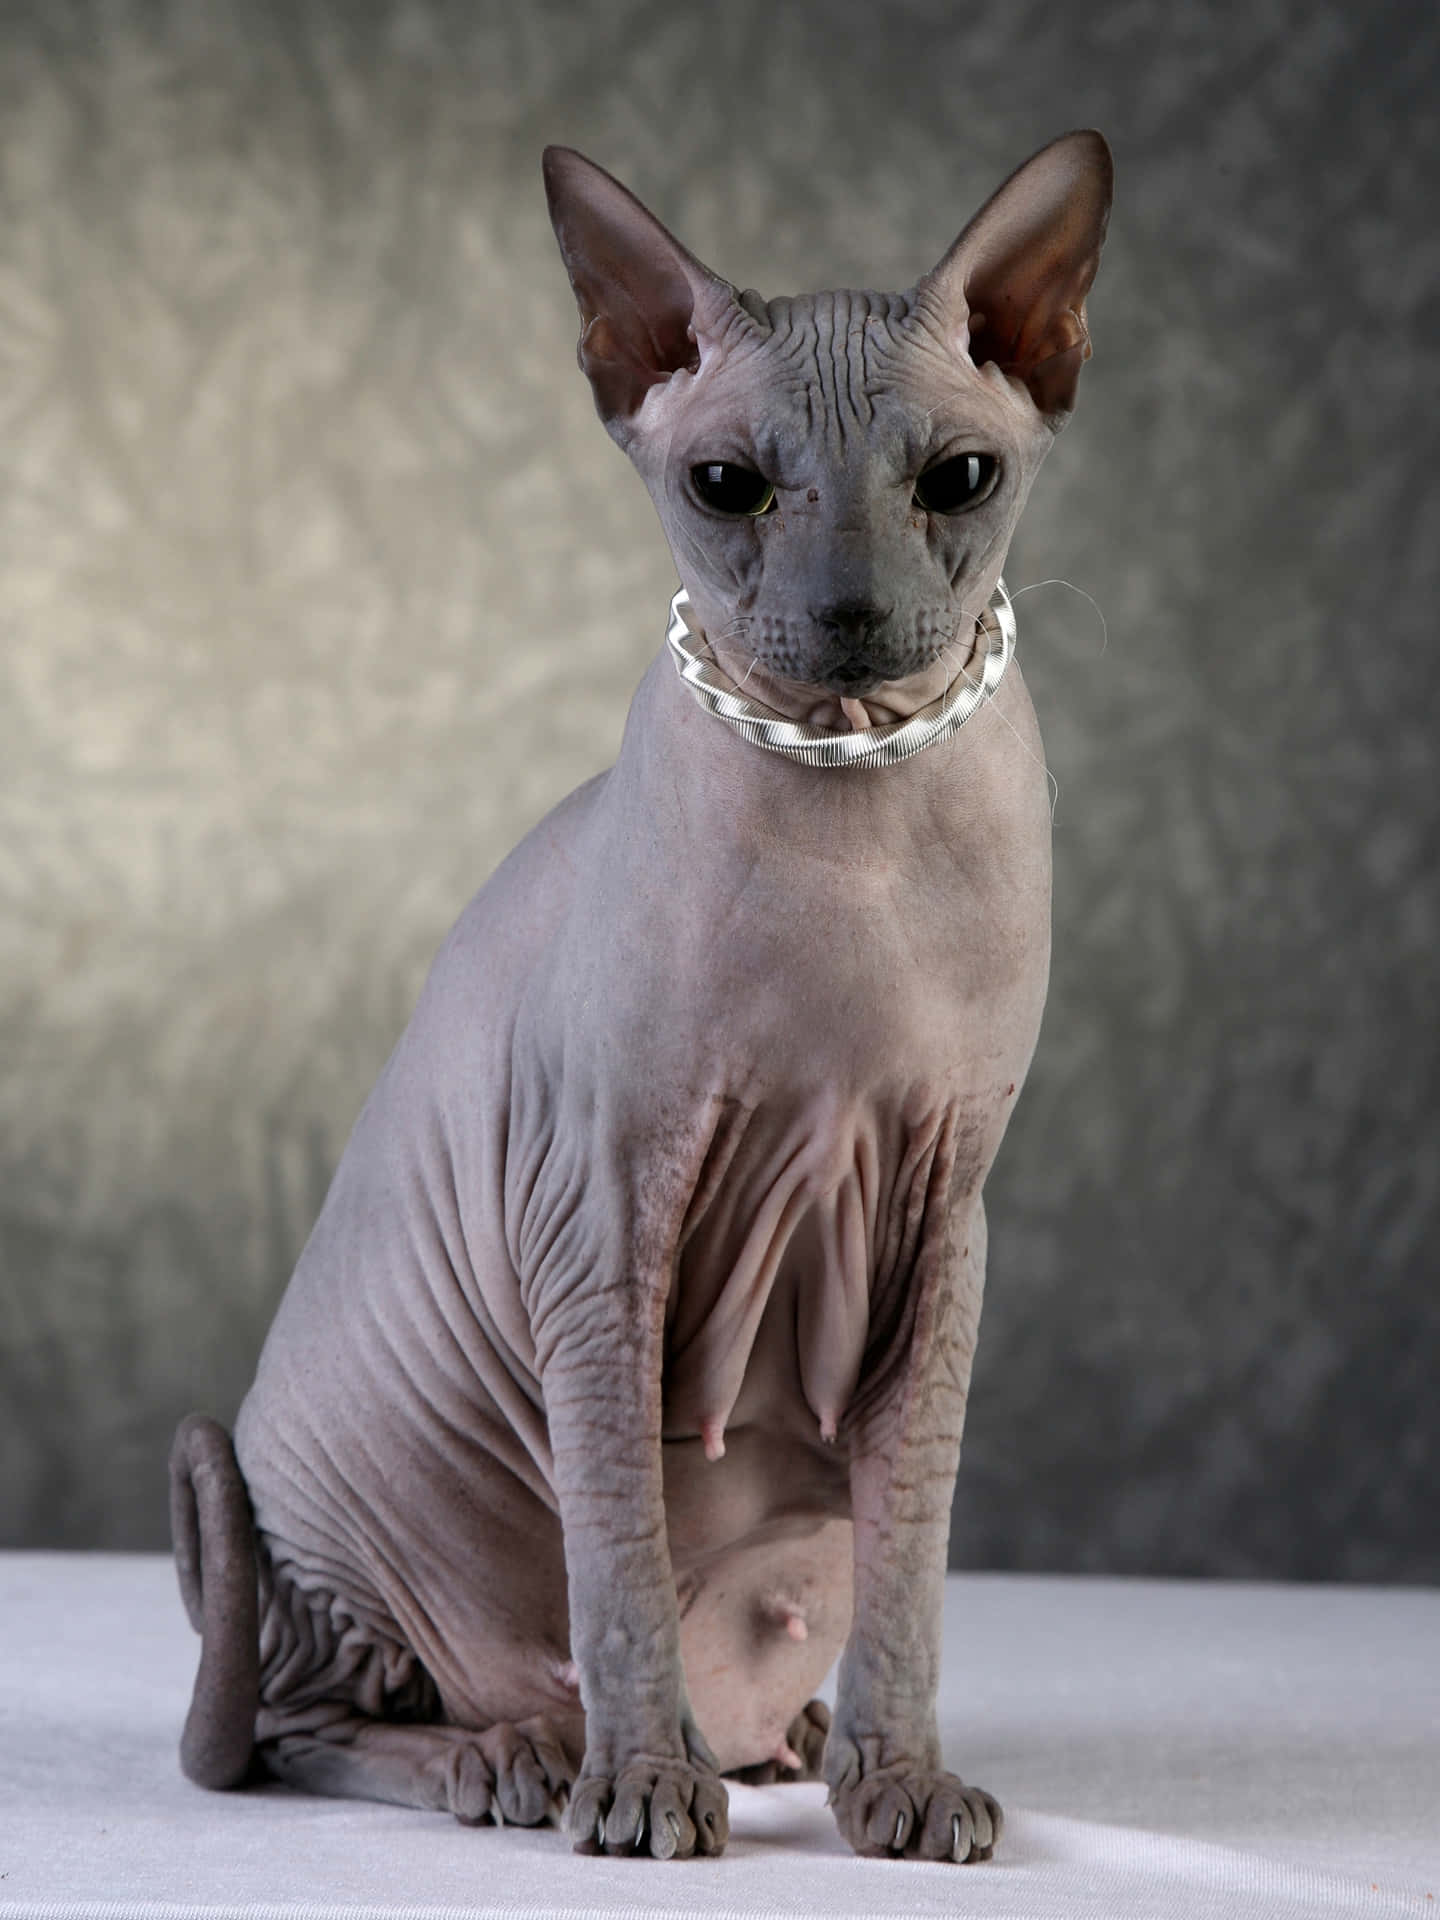 A regal Sphynx cat posing on a cozy couch Wallpaper